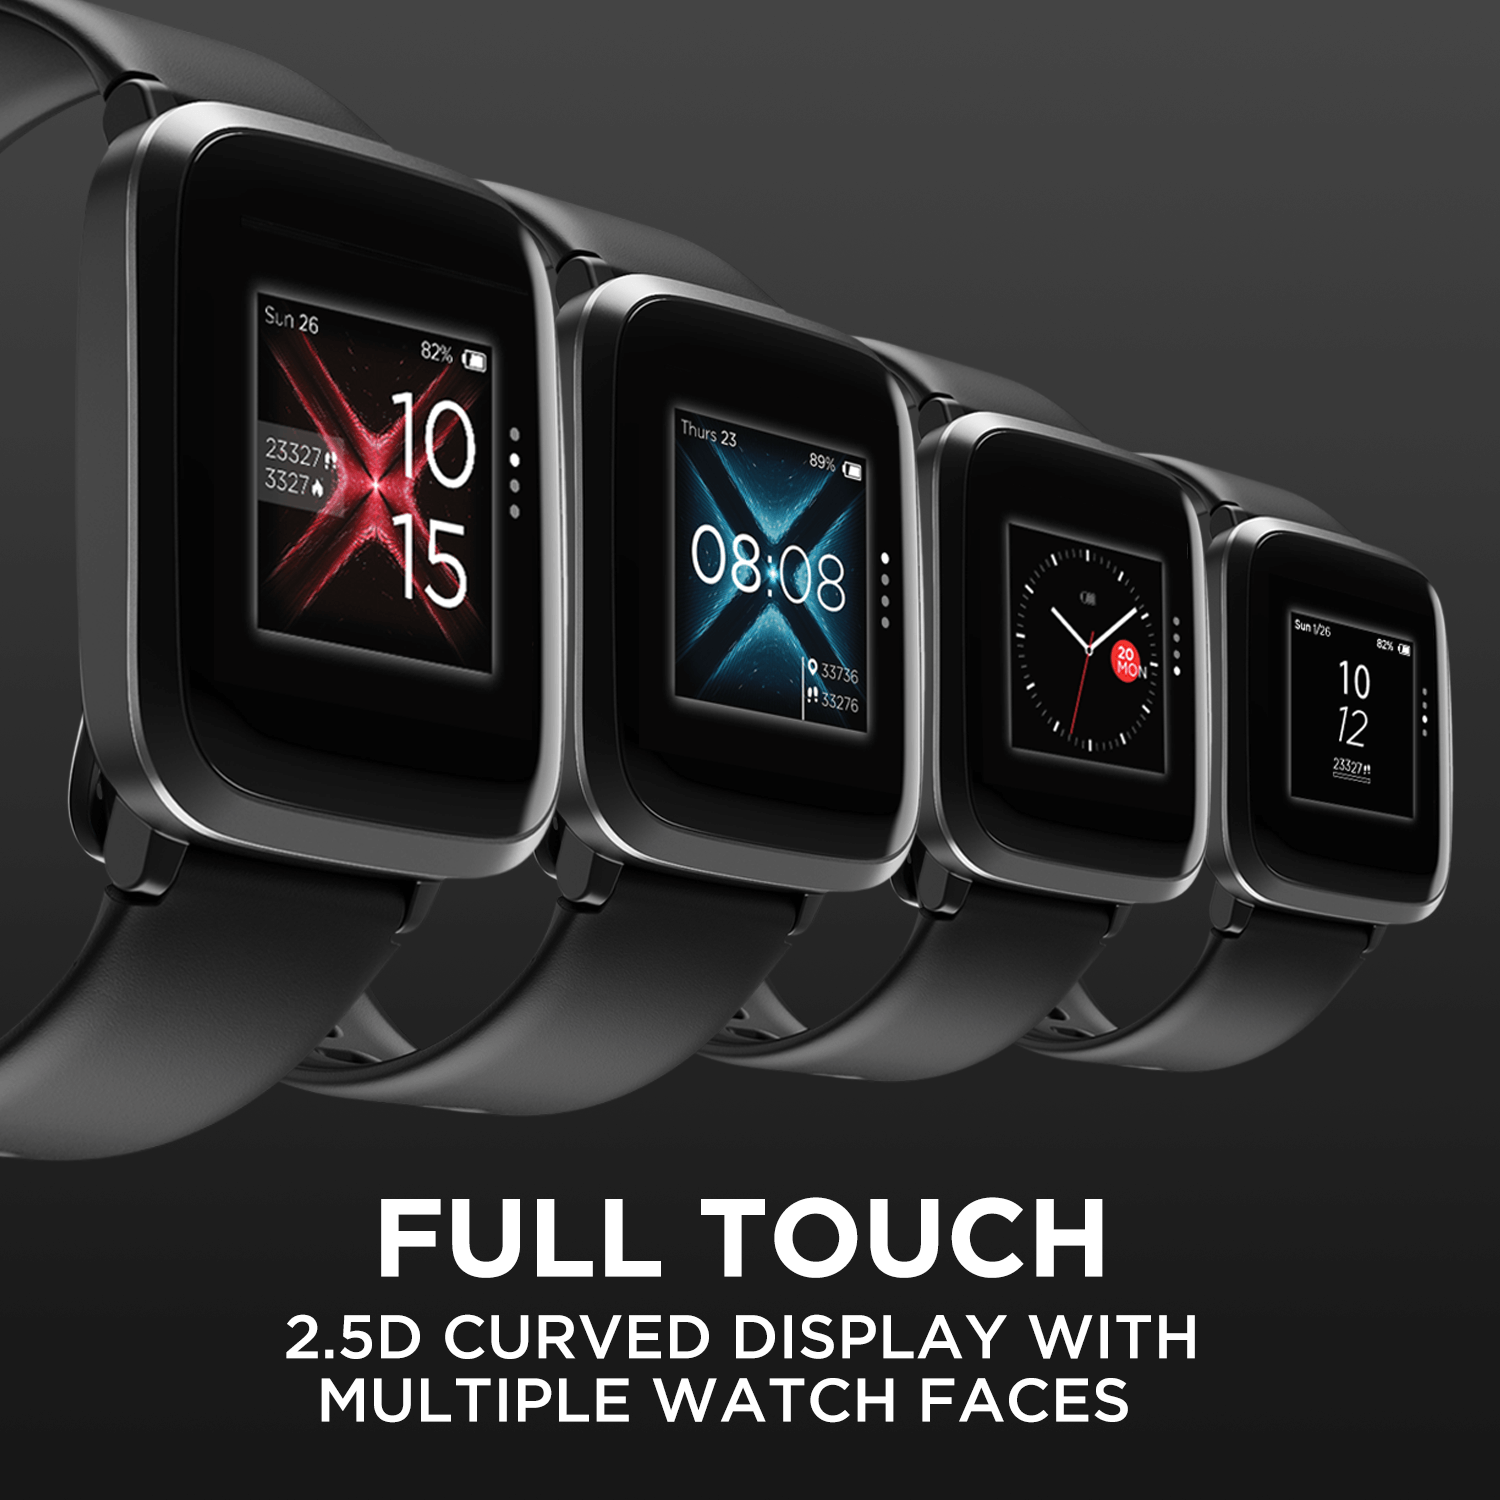 Storm Full-Touch 33mm (1.29") Curved Color Display, 5 ATM